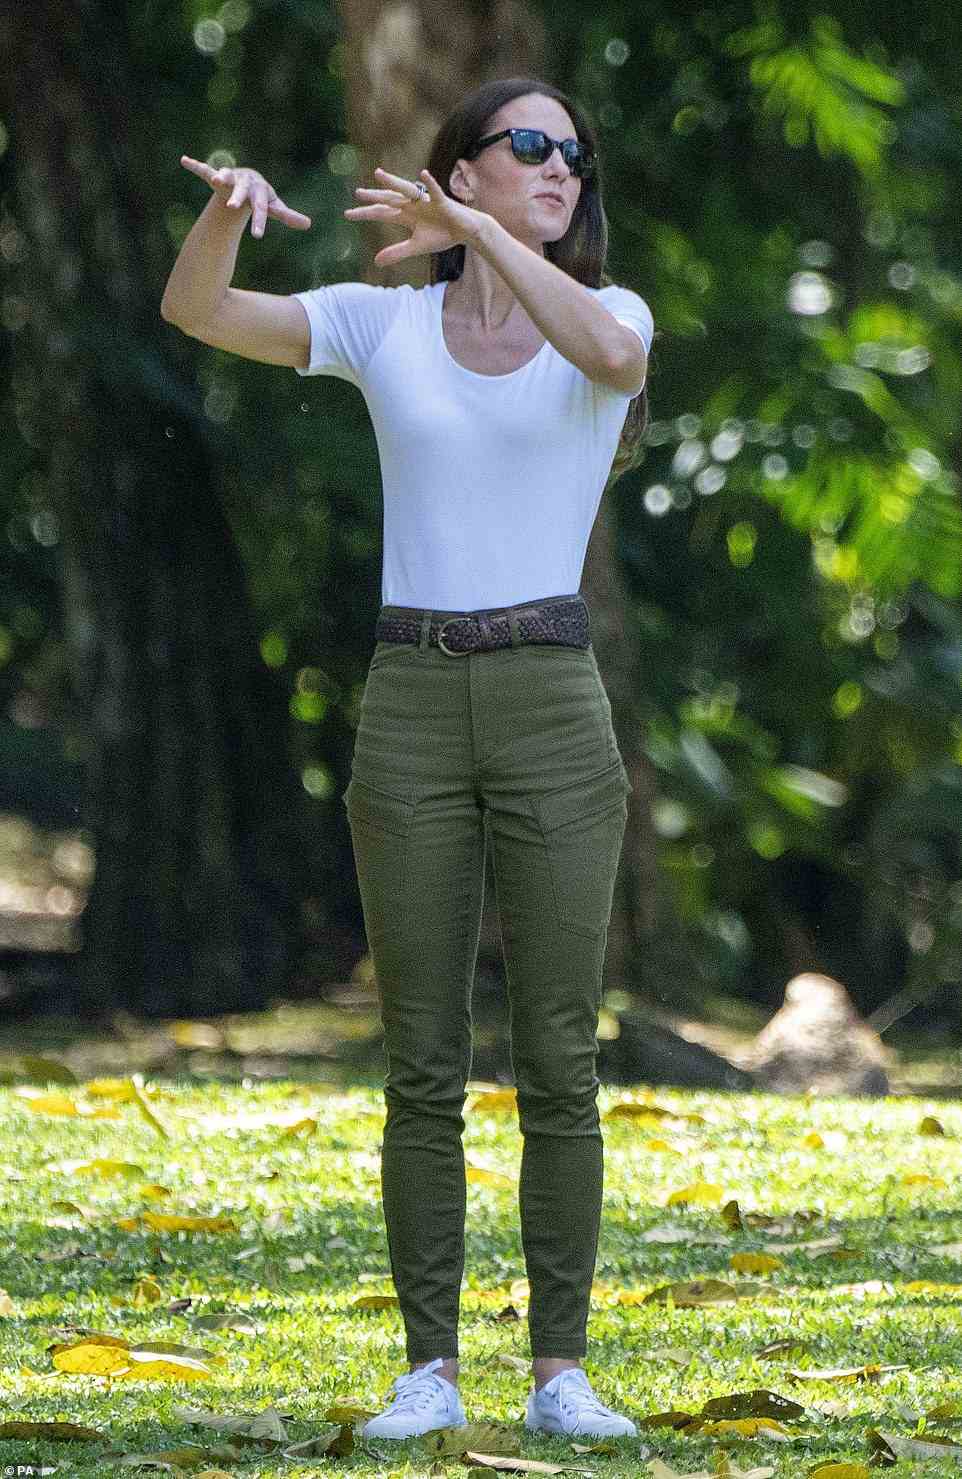 Pictured: The Duchess of Cambridge during a visit to Caracol, an ancient Mayan archaeological site deep in the jungle in the Chiquibul Forest in Belize